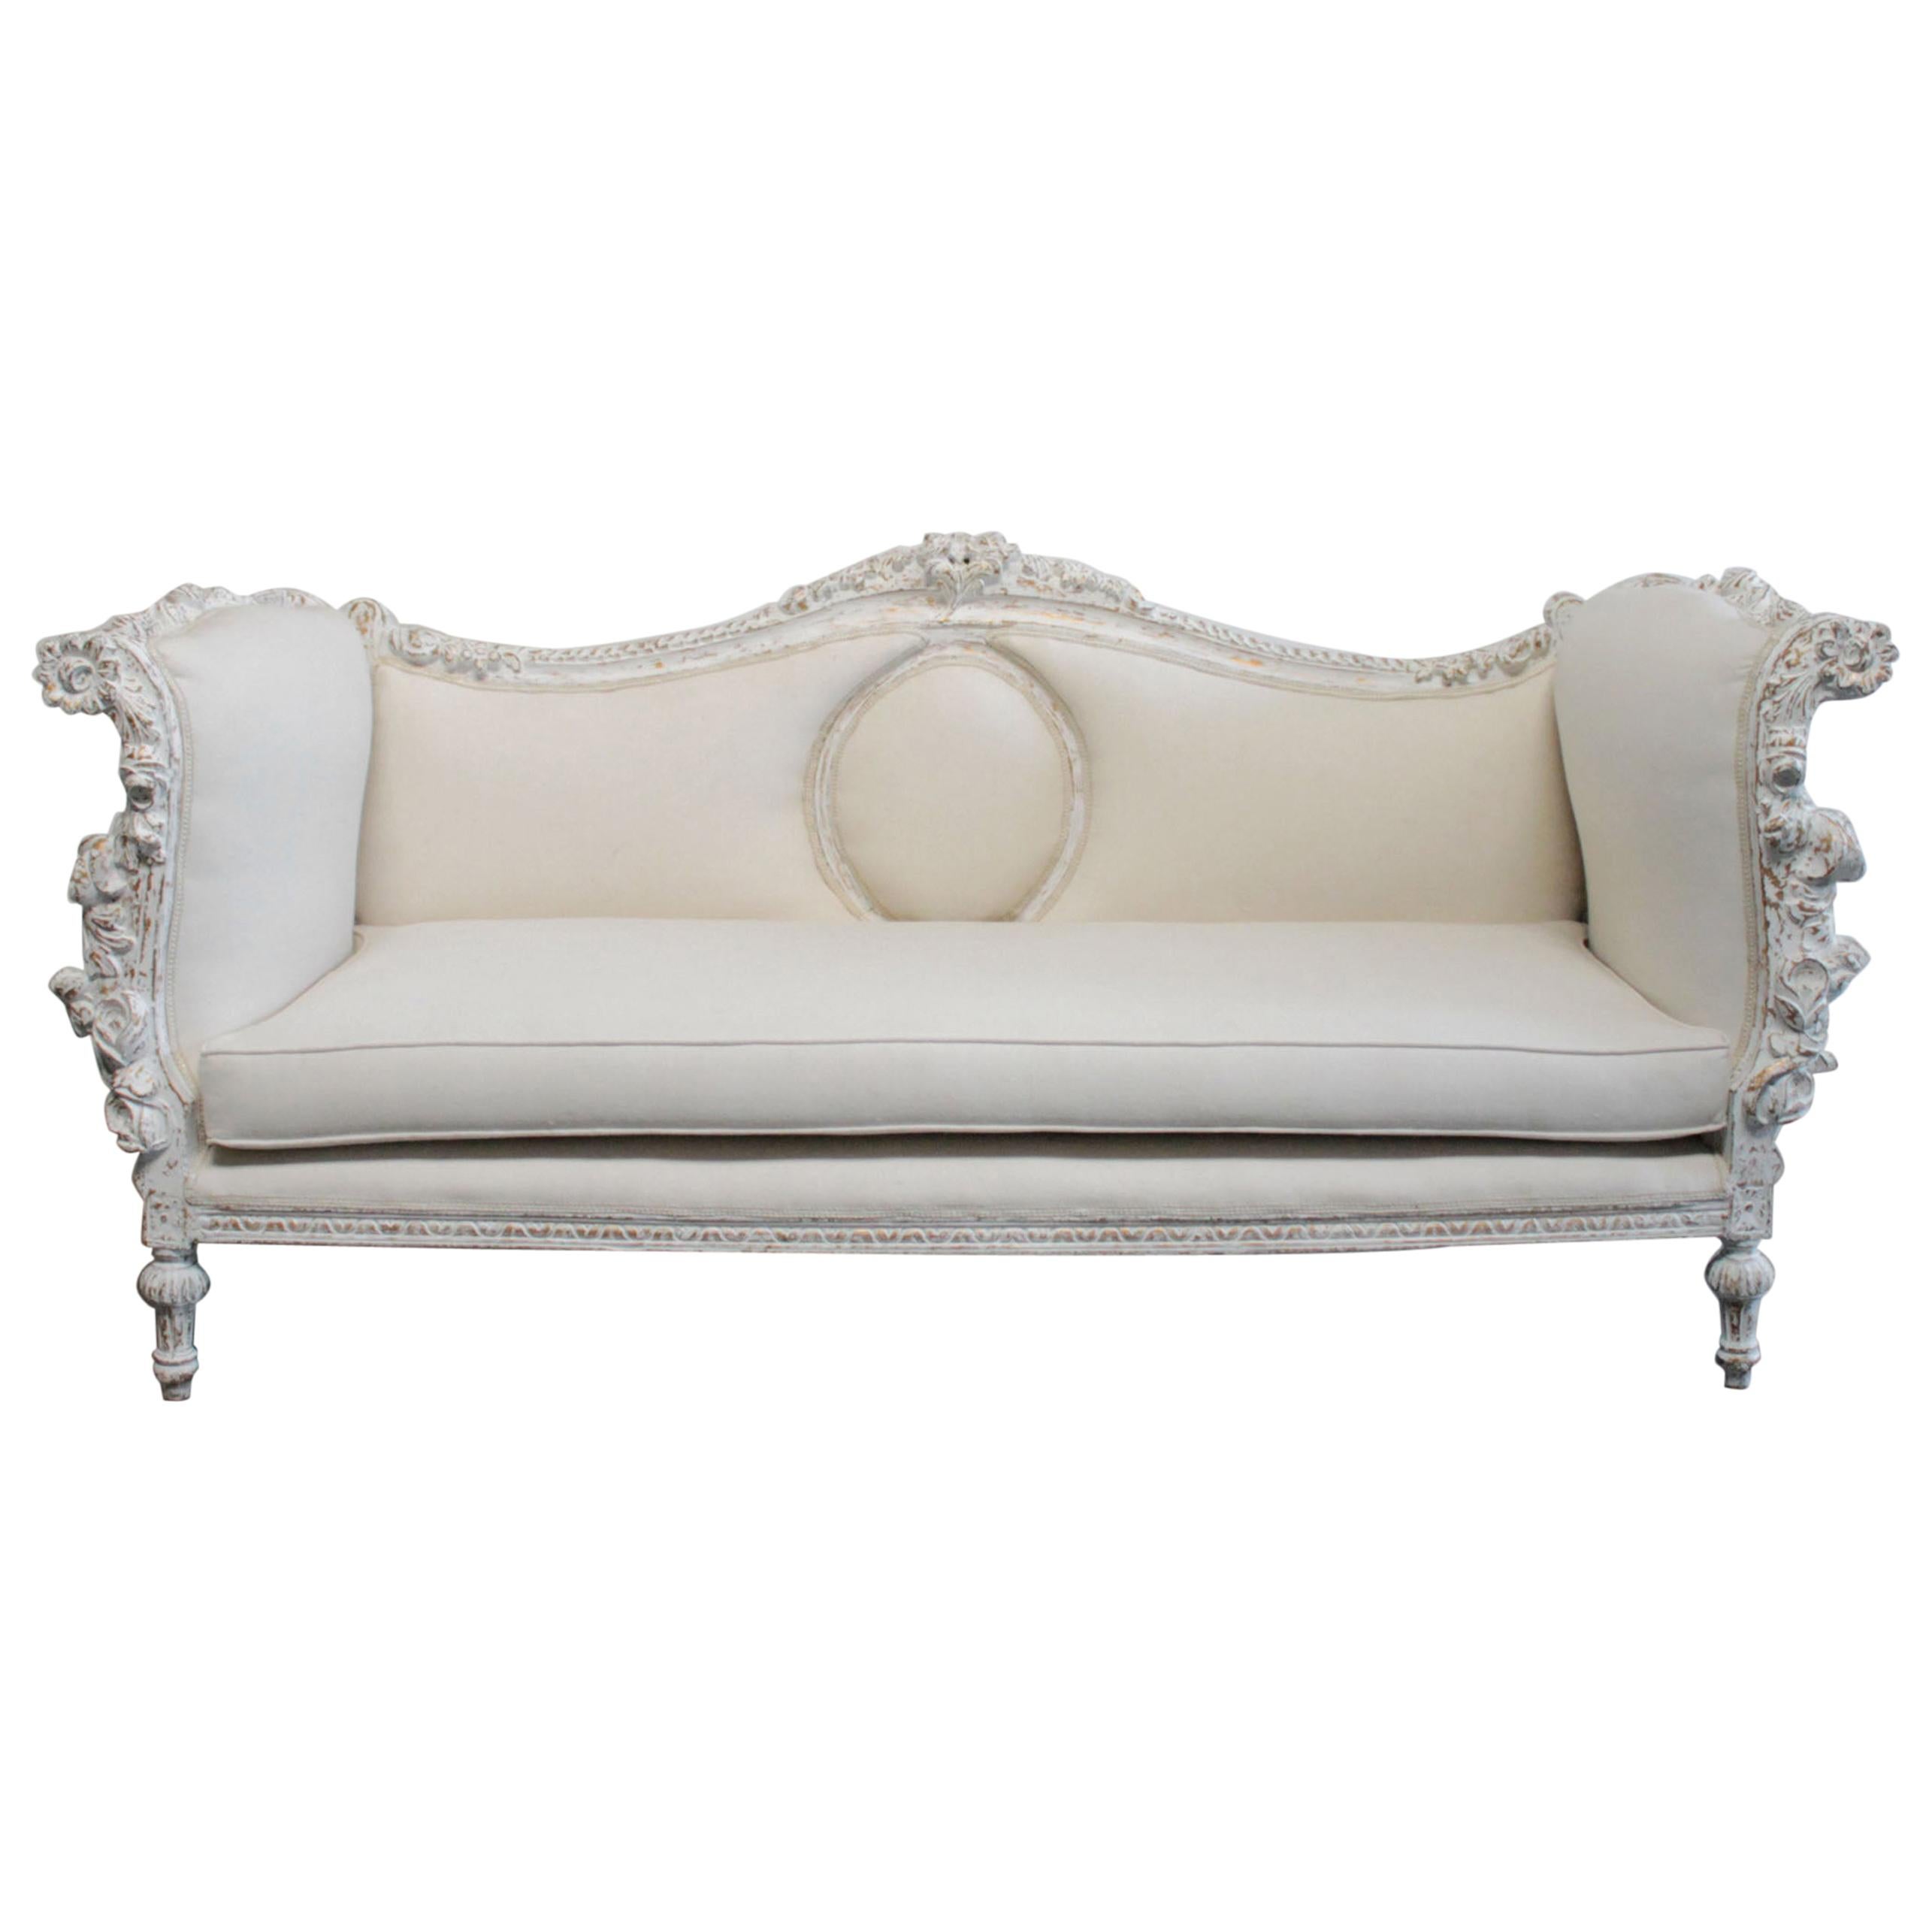 Vintage Carved and Painted French Style Sofa